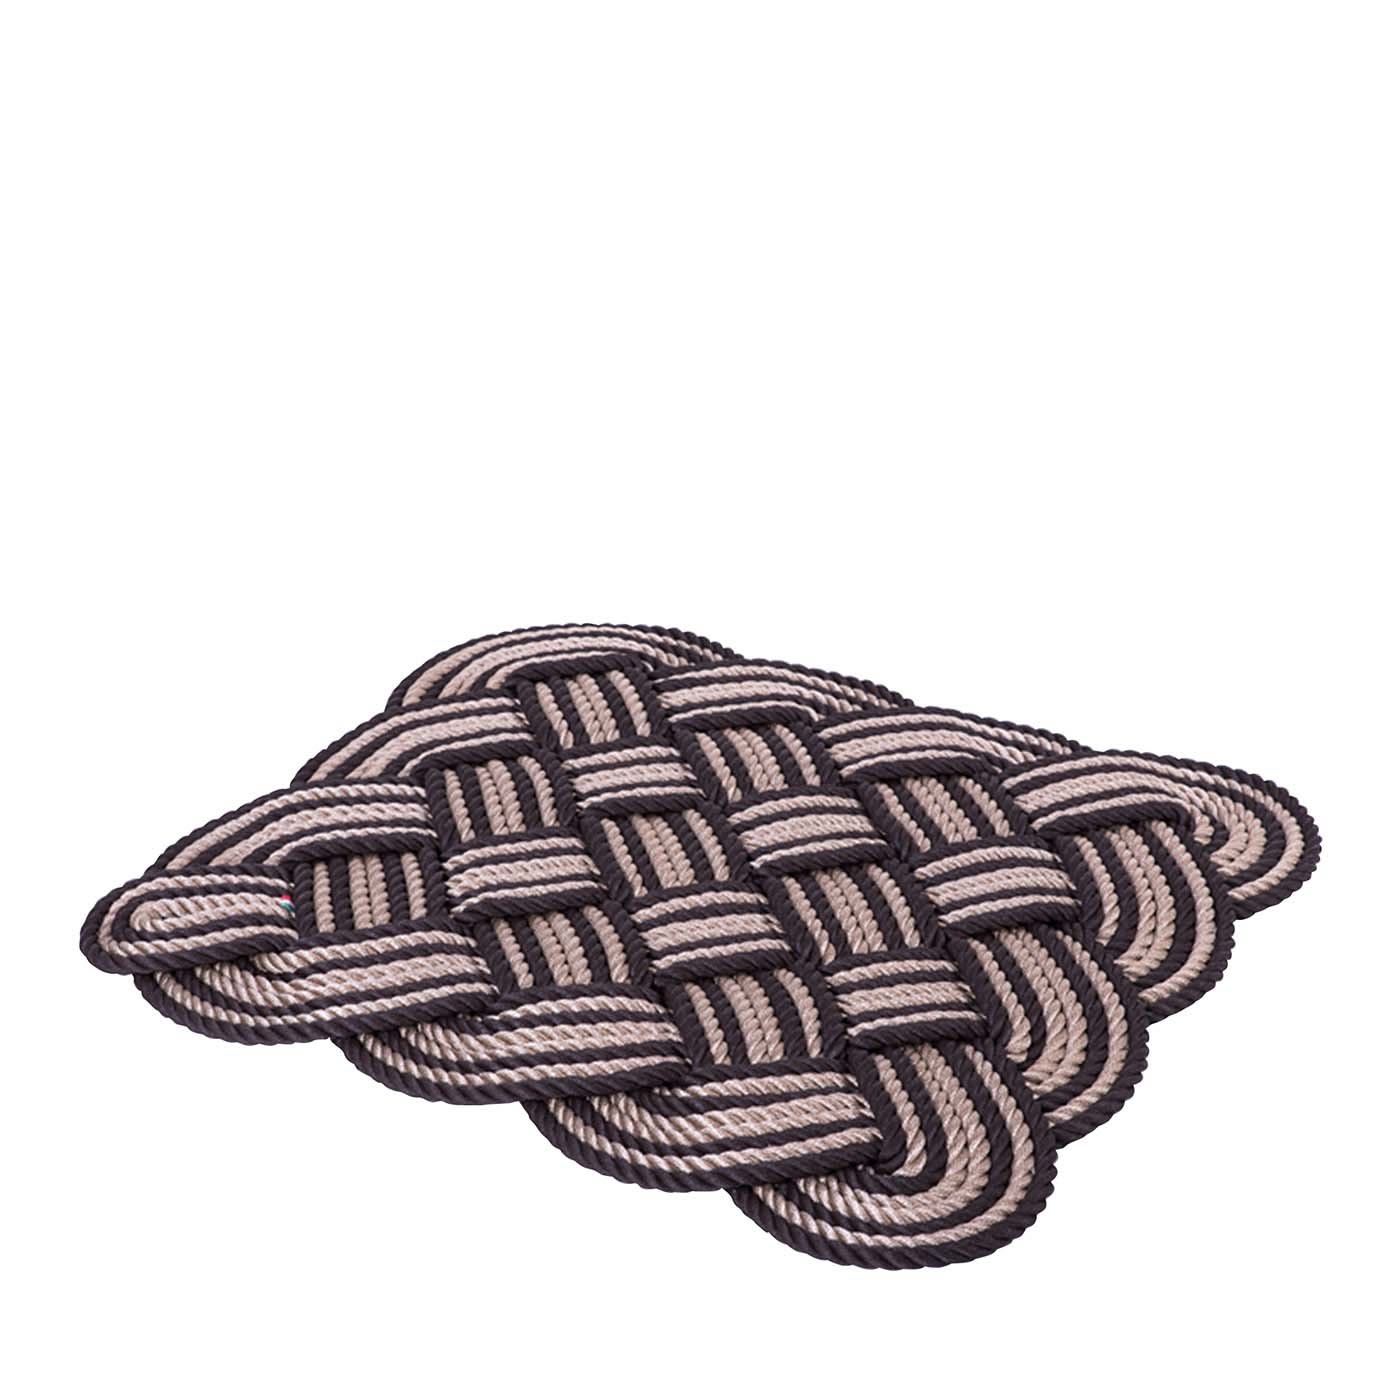 Maxi Beige and Brown Square Trivet - Marricreo